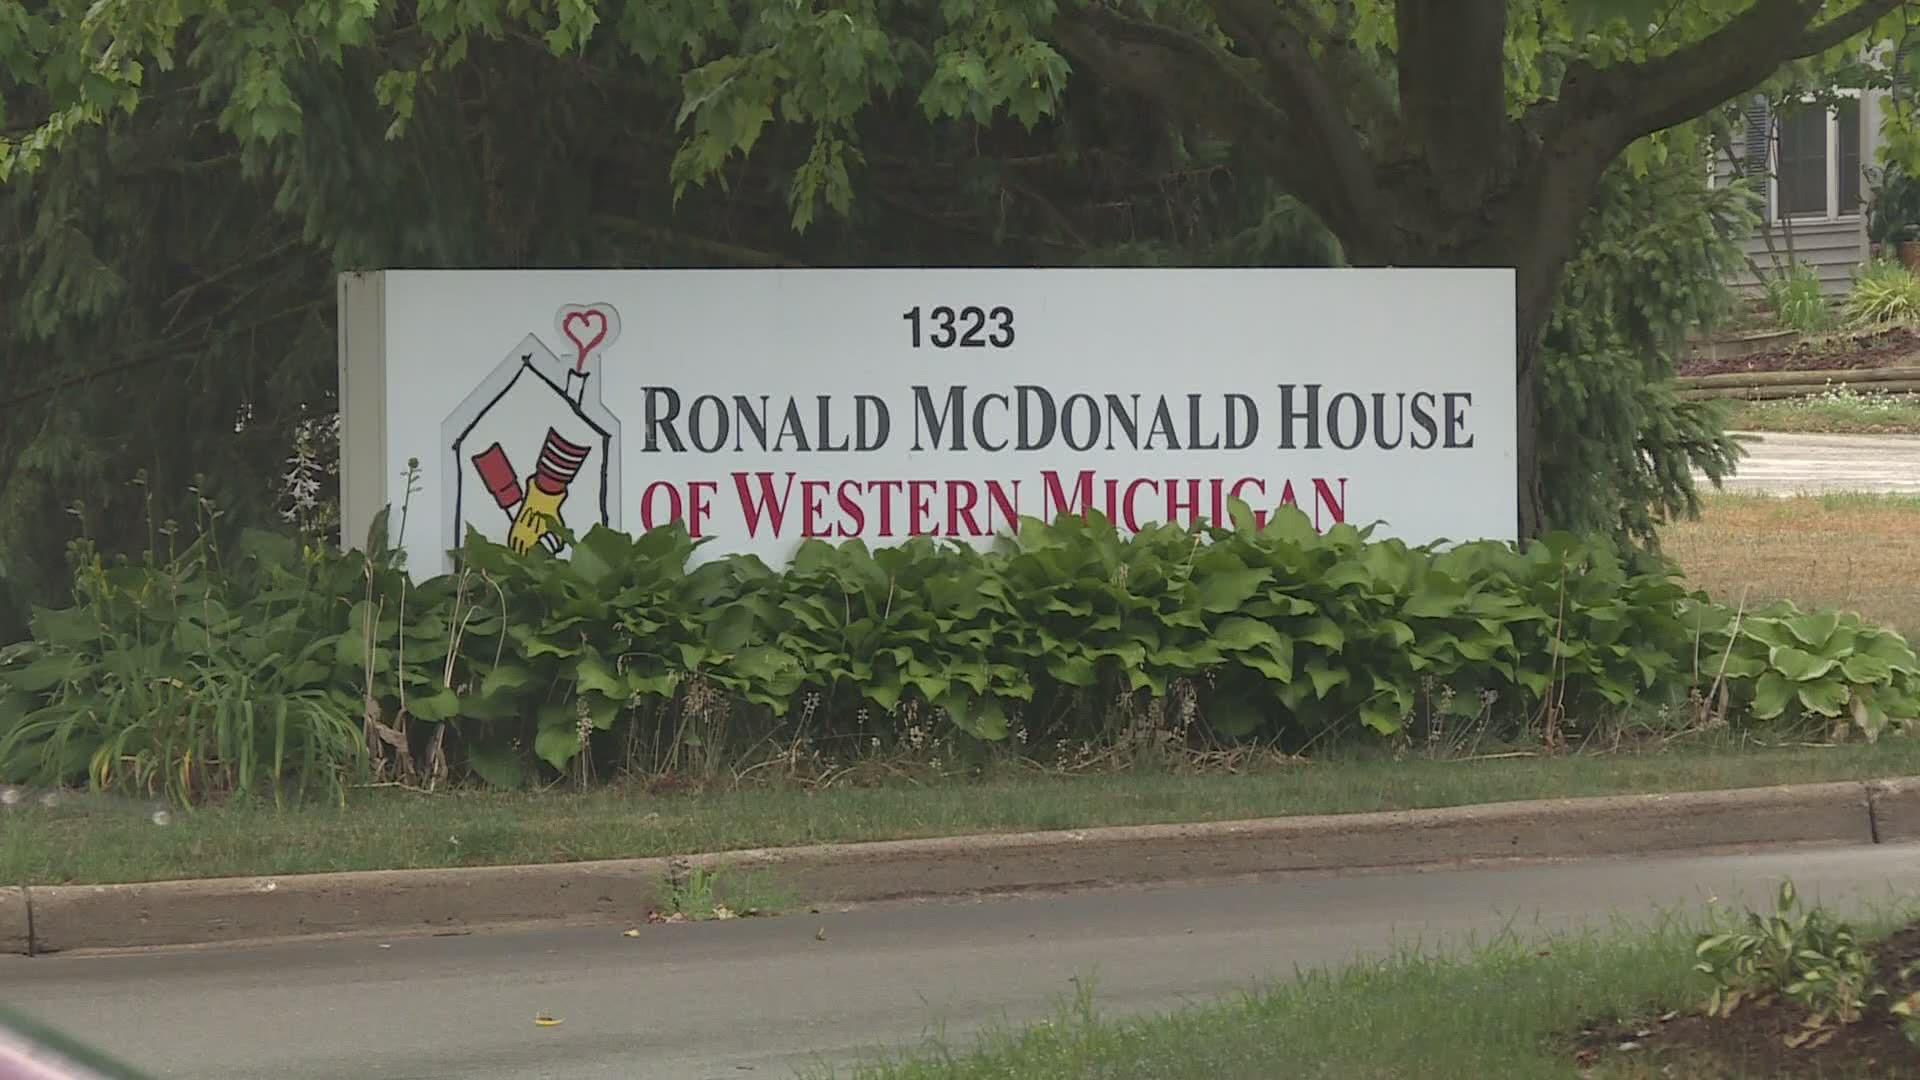 Ronald McDonald House is receiving families again, but under new pandemic protocols.